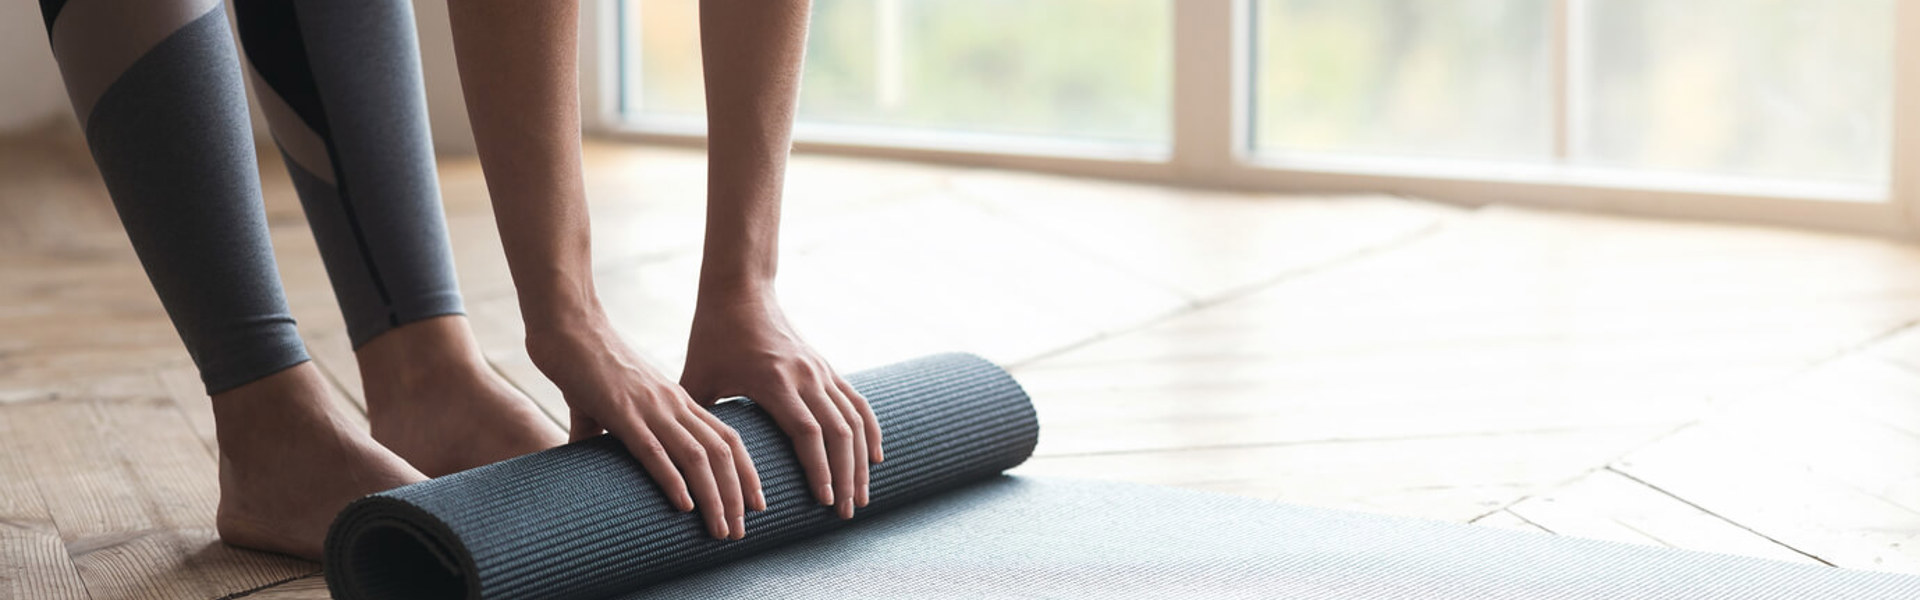 a person rolling up a grey Pilates exercise mat